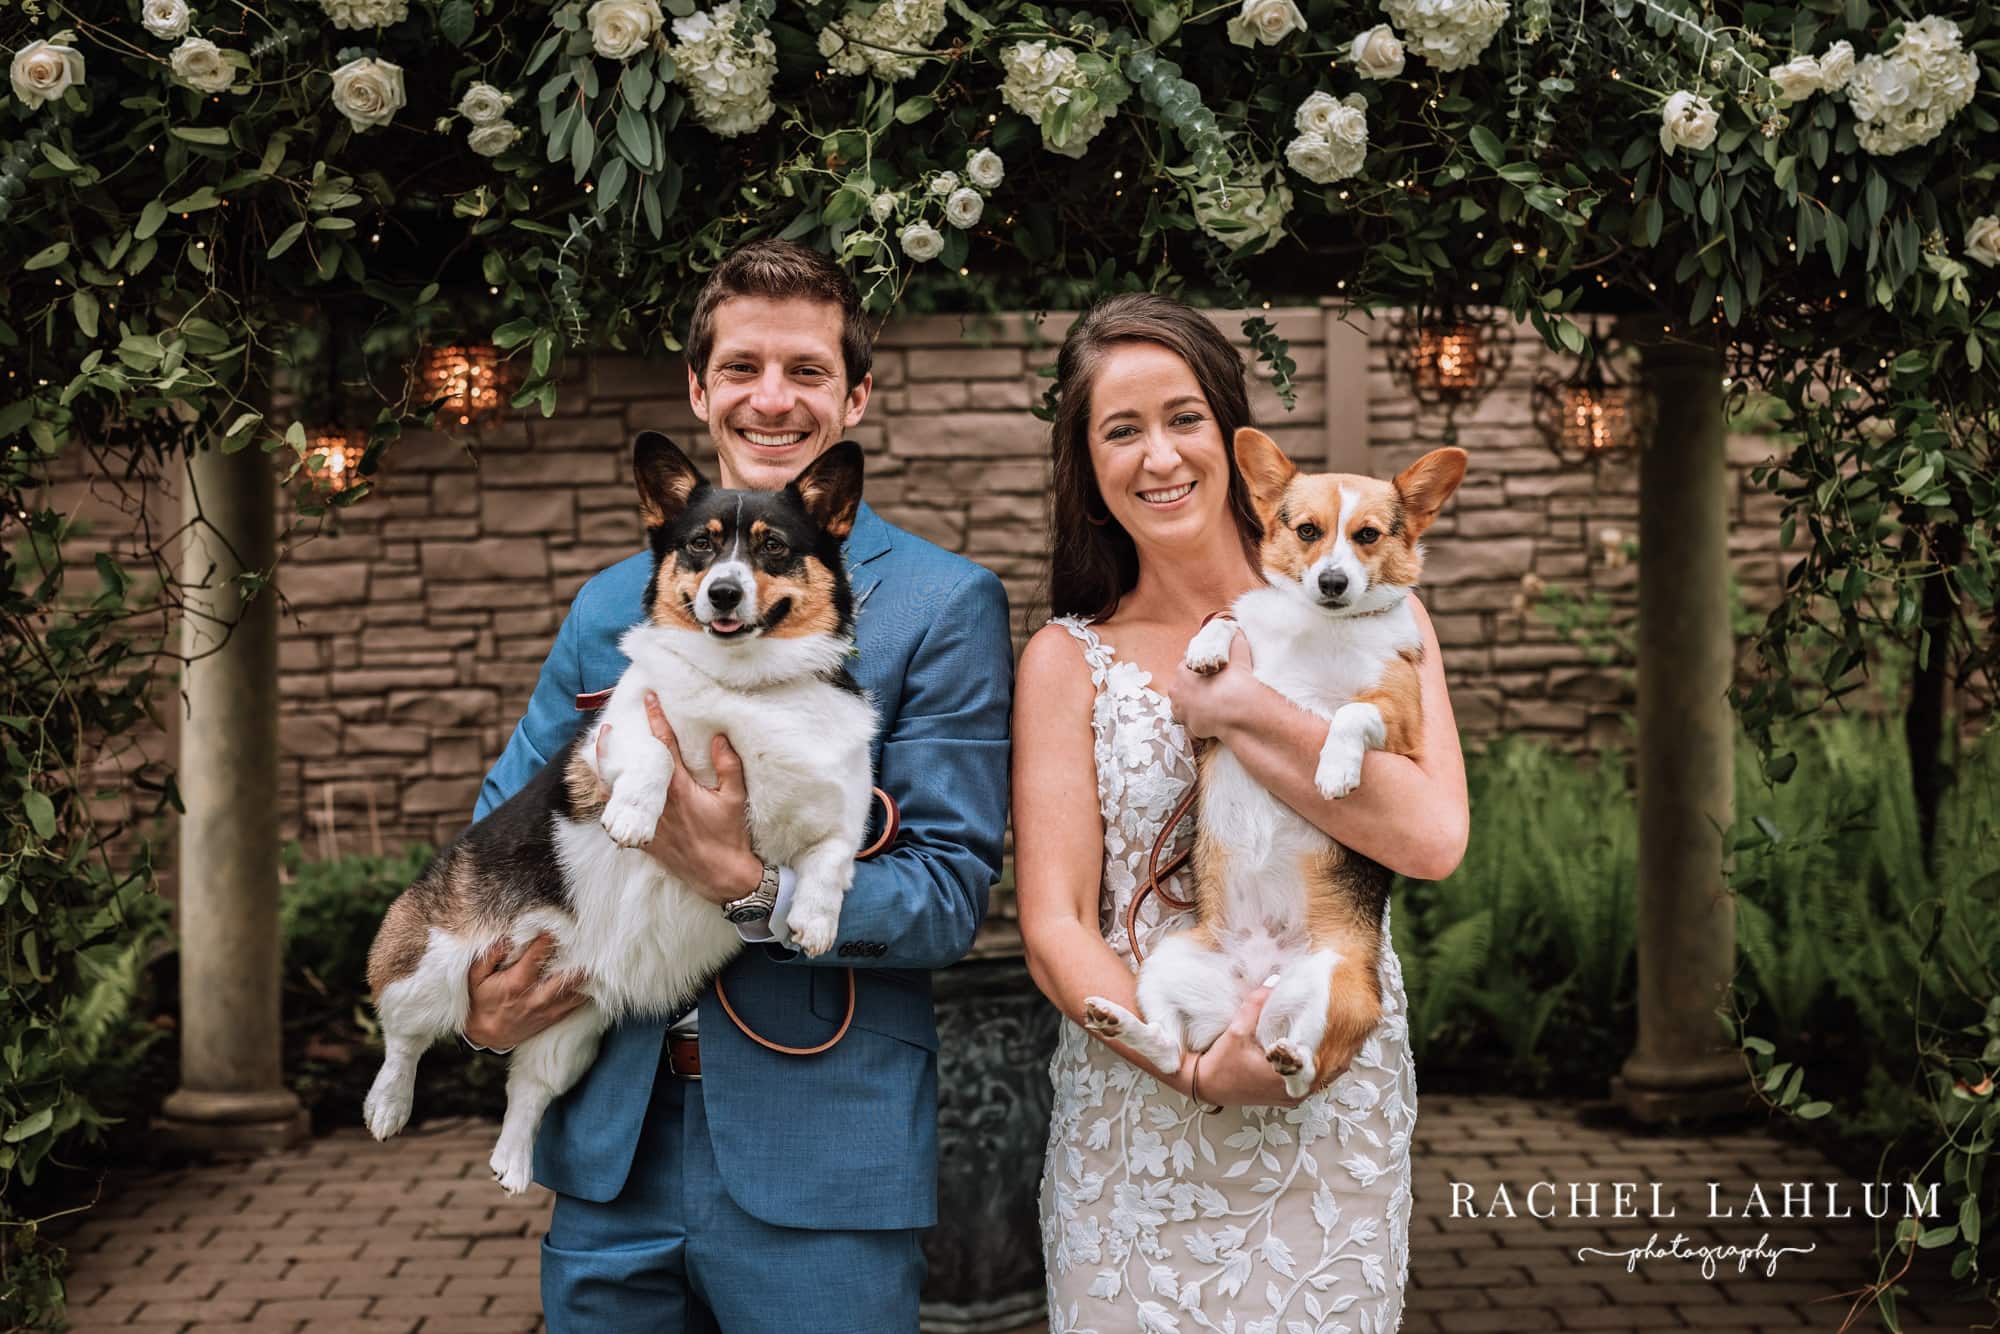 Bride and groom pose with their corgis in their arms in Stillwater, MN.